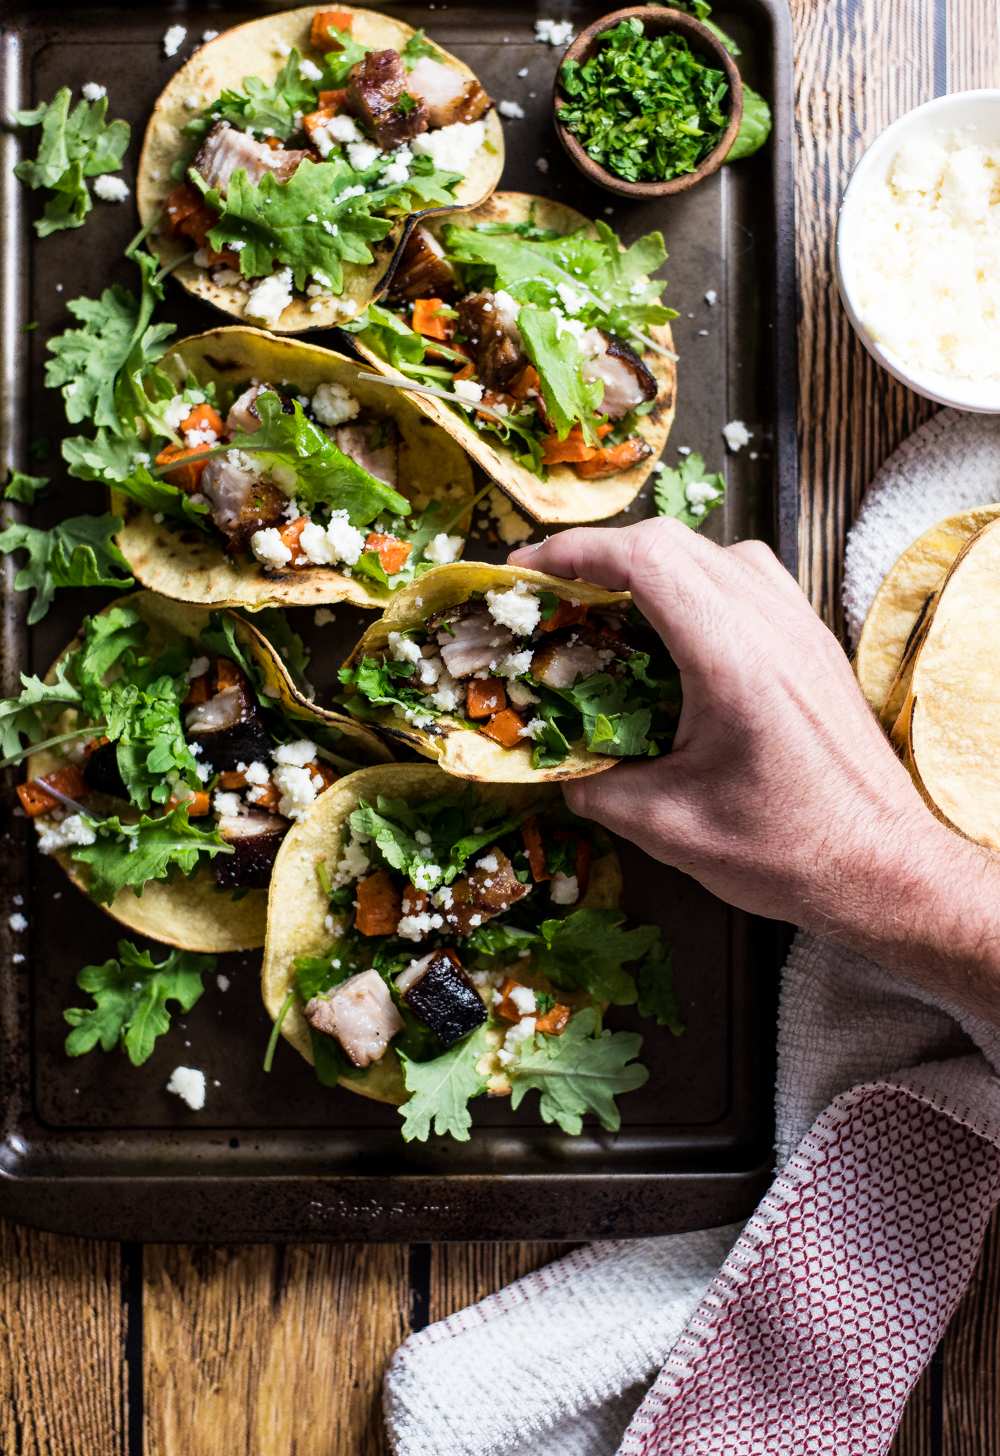 Take your taco Tuesday up a notch, and make these braised pork belly and sweet potato tacos! Crispy, tender pork belly really makes these tacos shine!